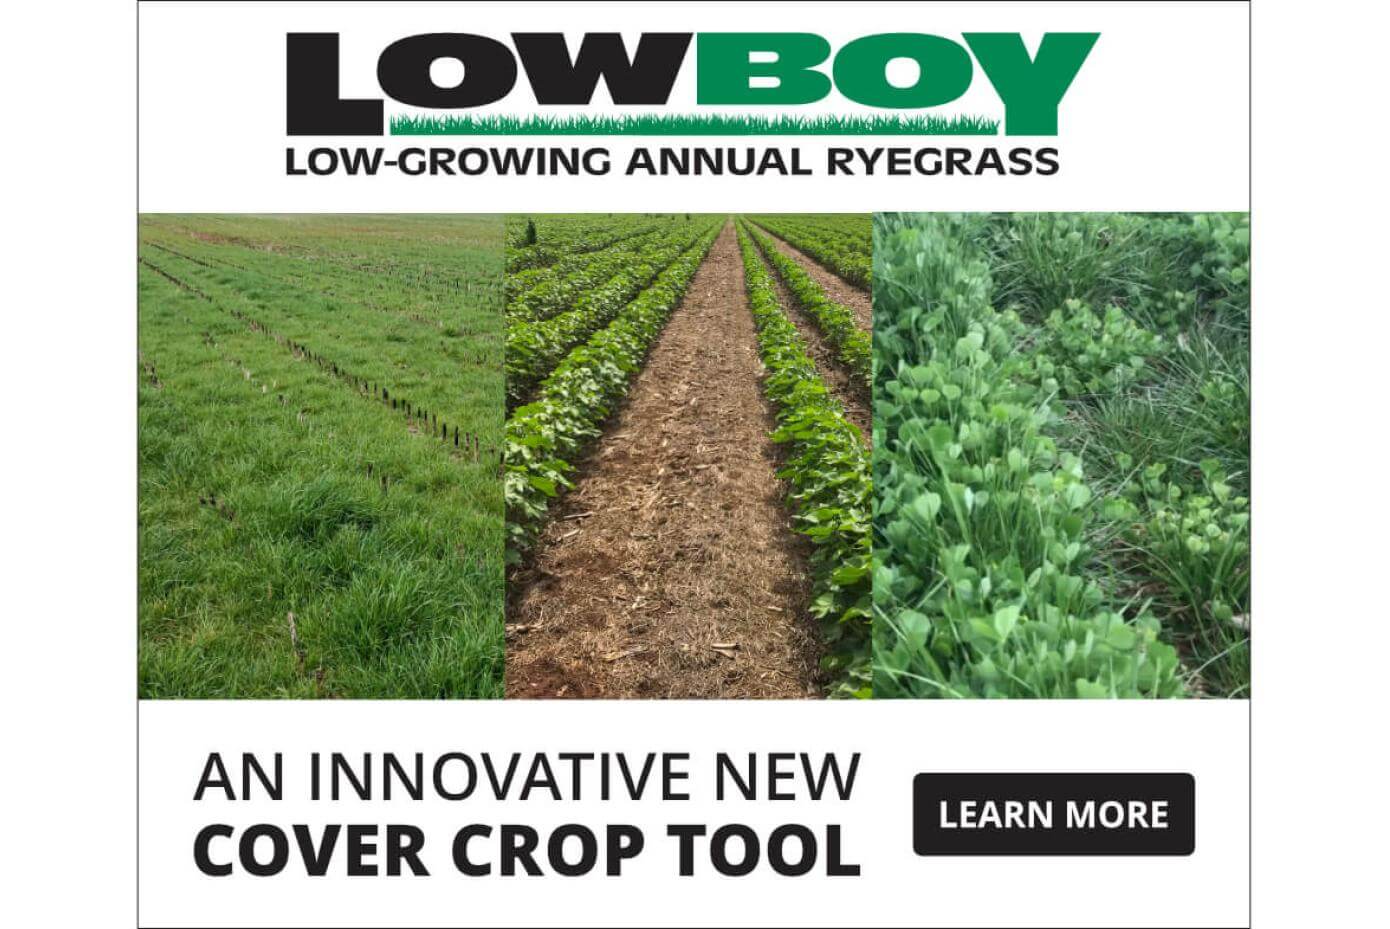 LowBoy being used as a cover crop after corn, in cotton and in mix with clover